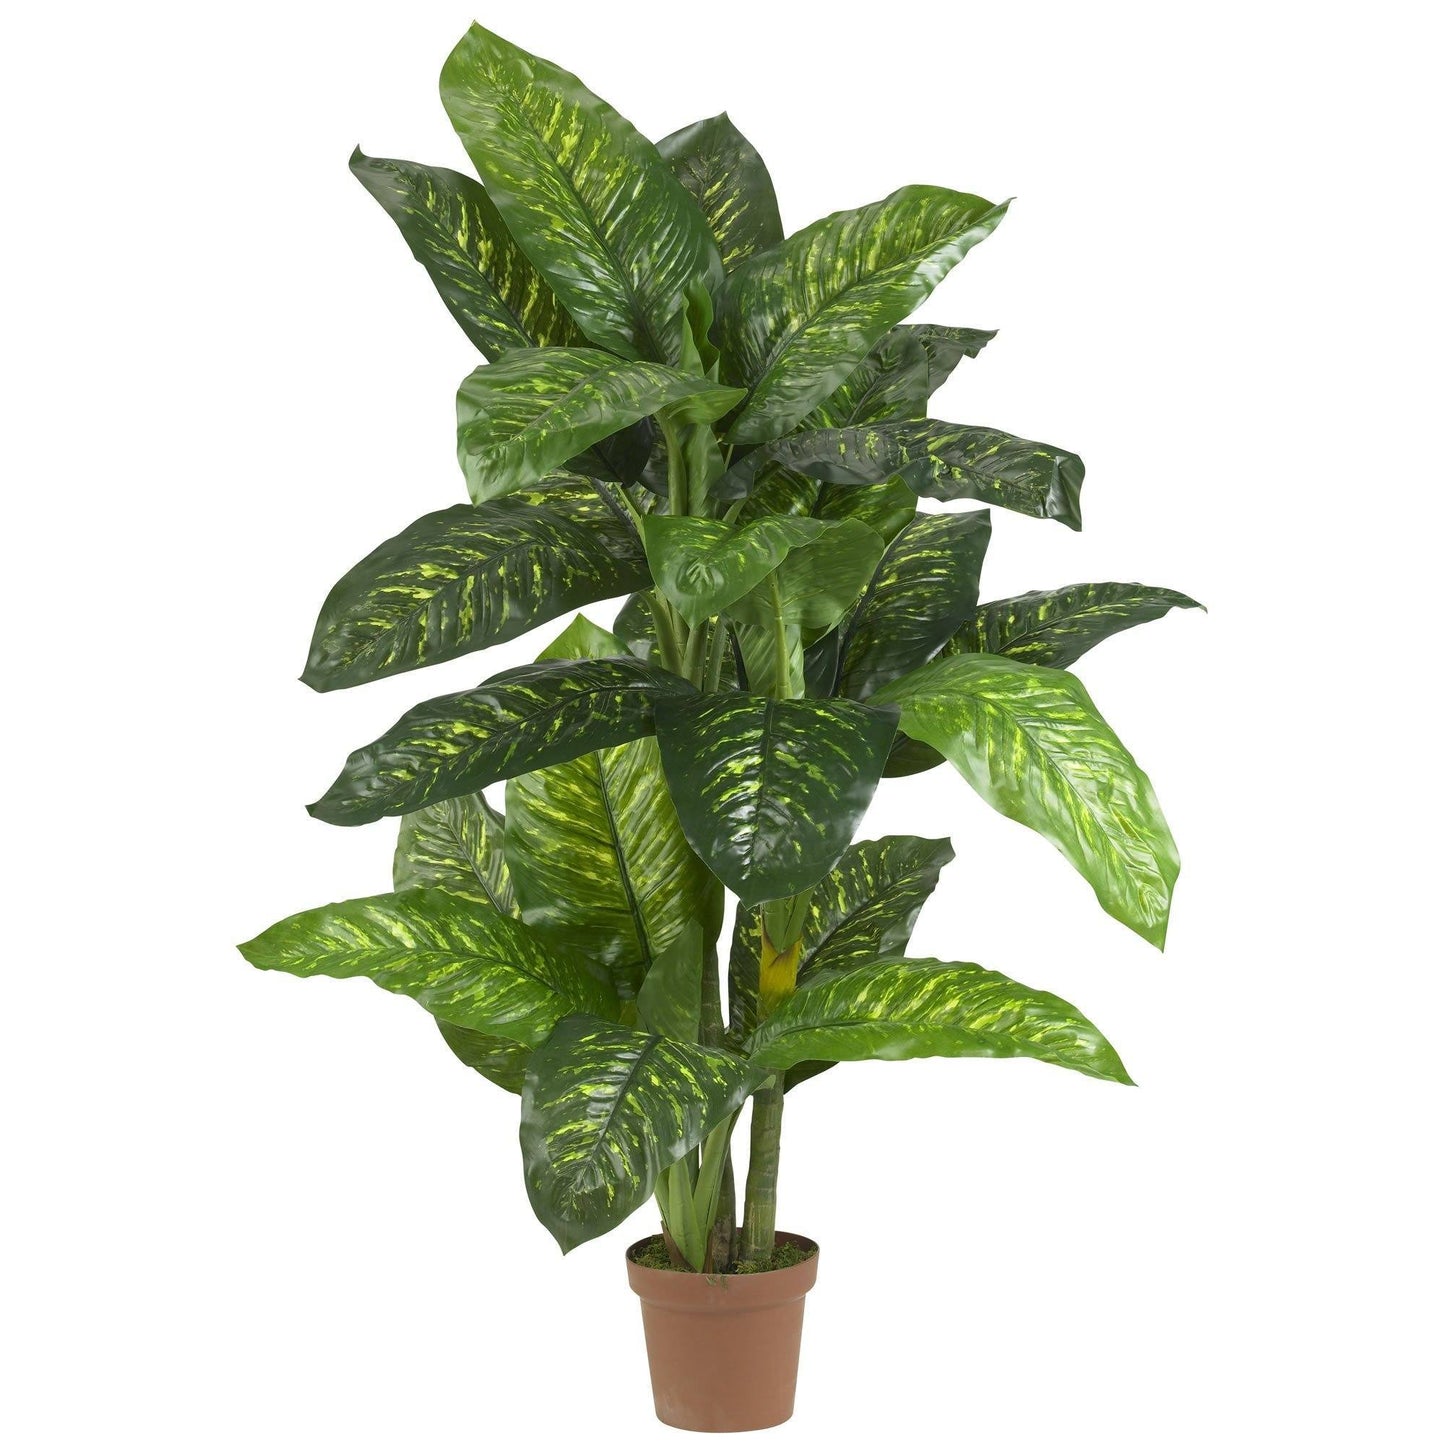 5' Dieffenbachia Silk Plant (Real Touch) by Nearly Natural